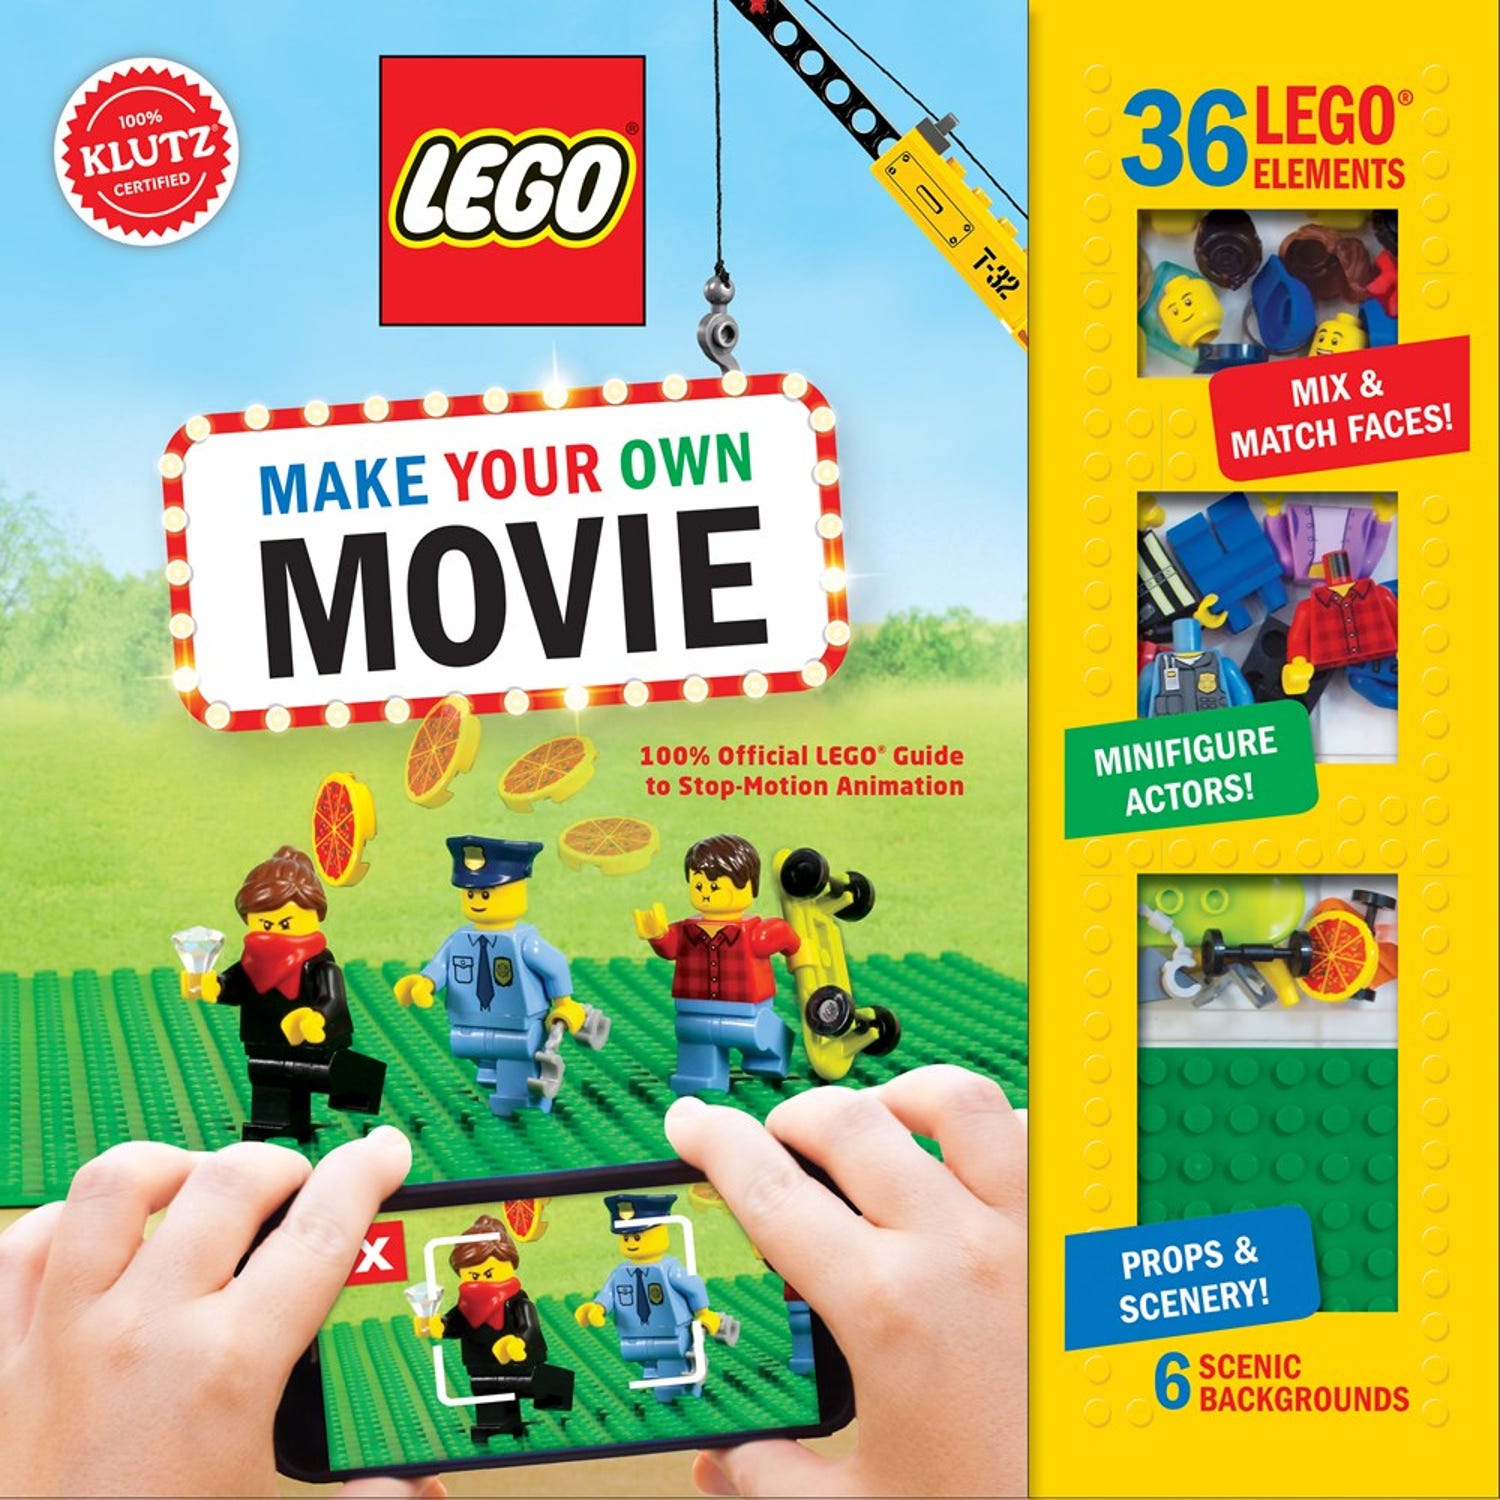 Your Own Movie: 100% Official LEGO Guide to Animation 5006824 | Other | Buy online at the Official LEGO® Shop